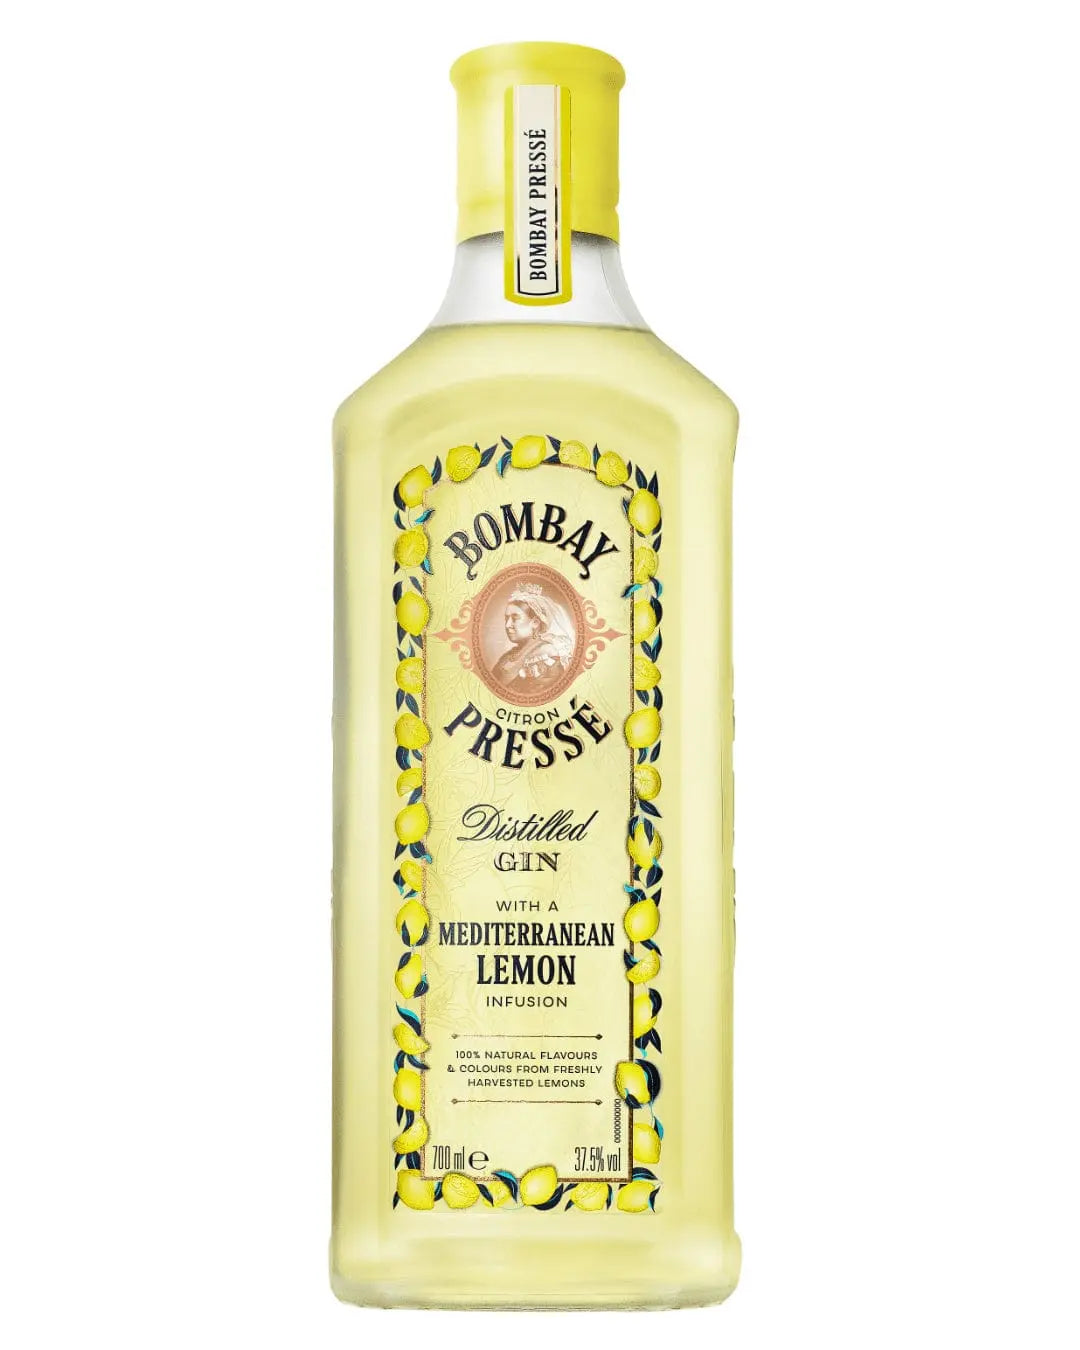 Bombay Citron Presse Gin, 70 cl Gin